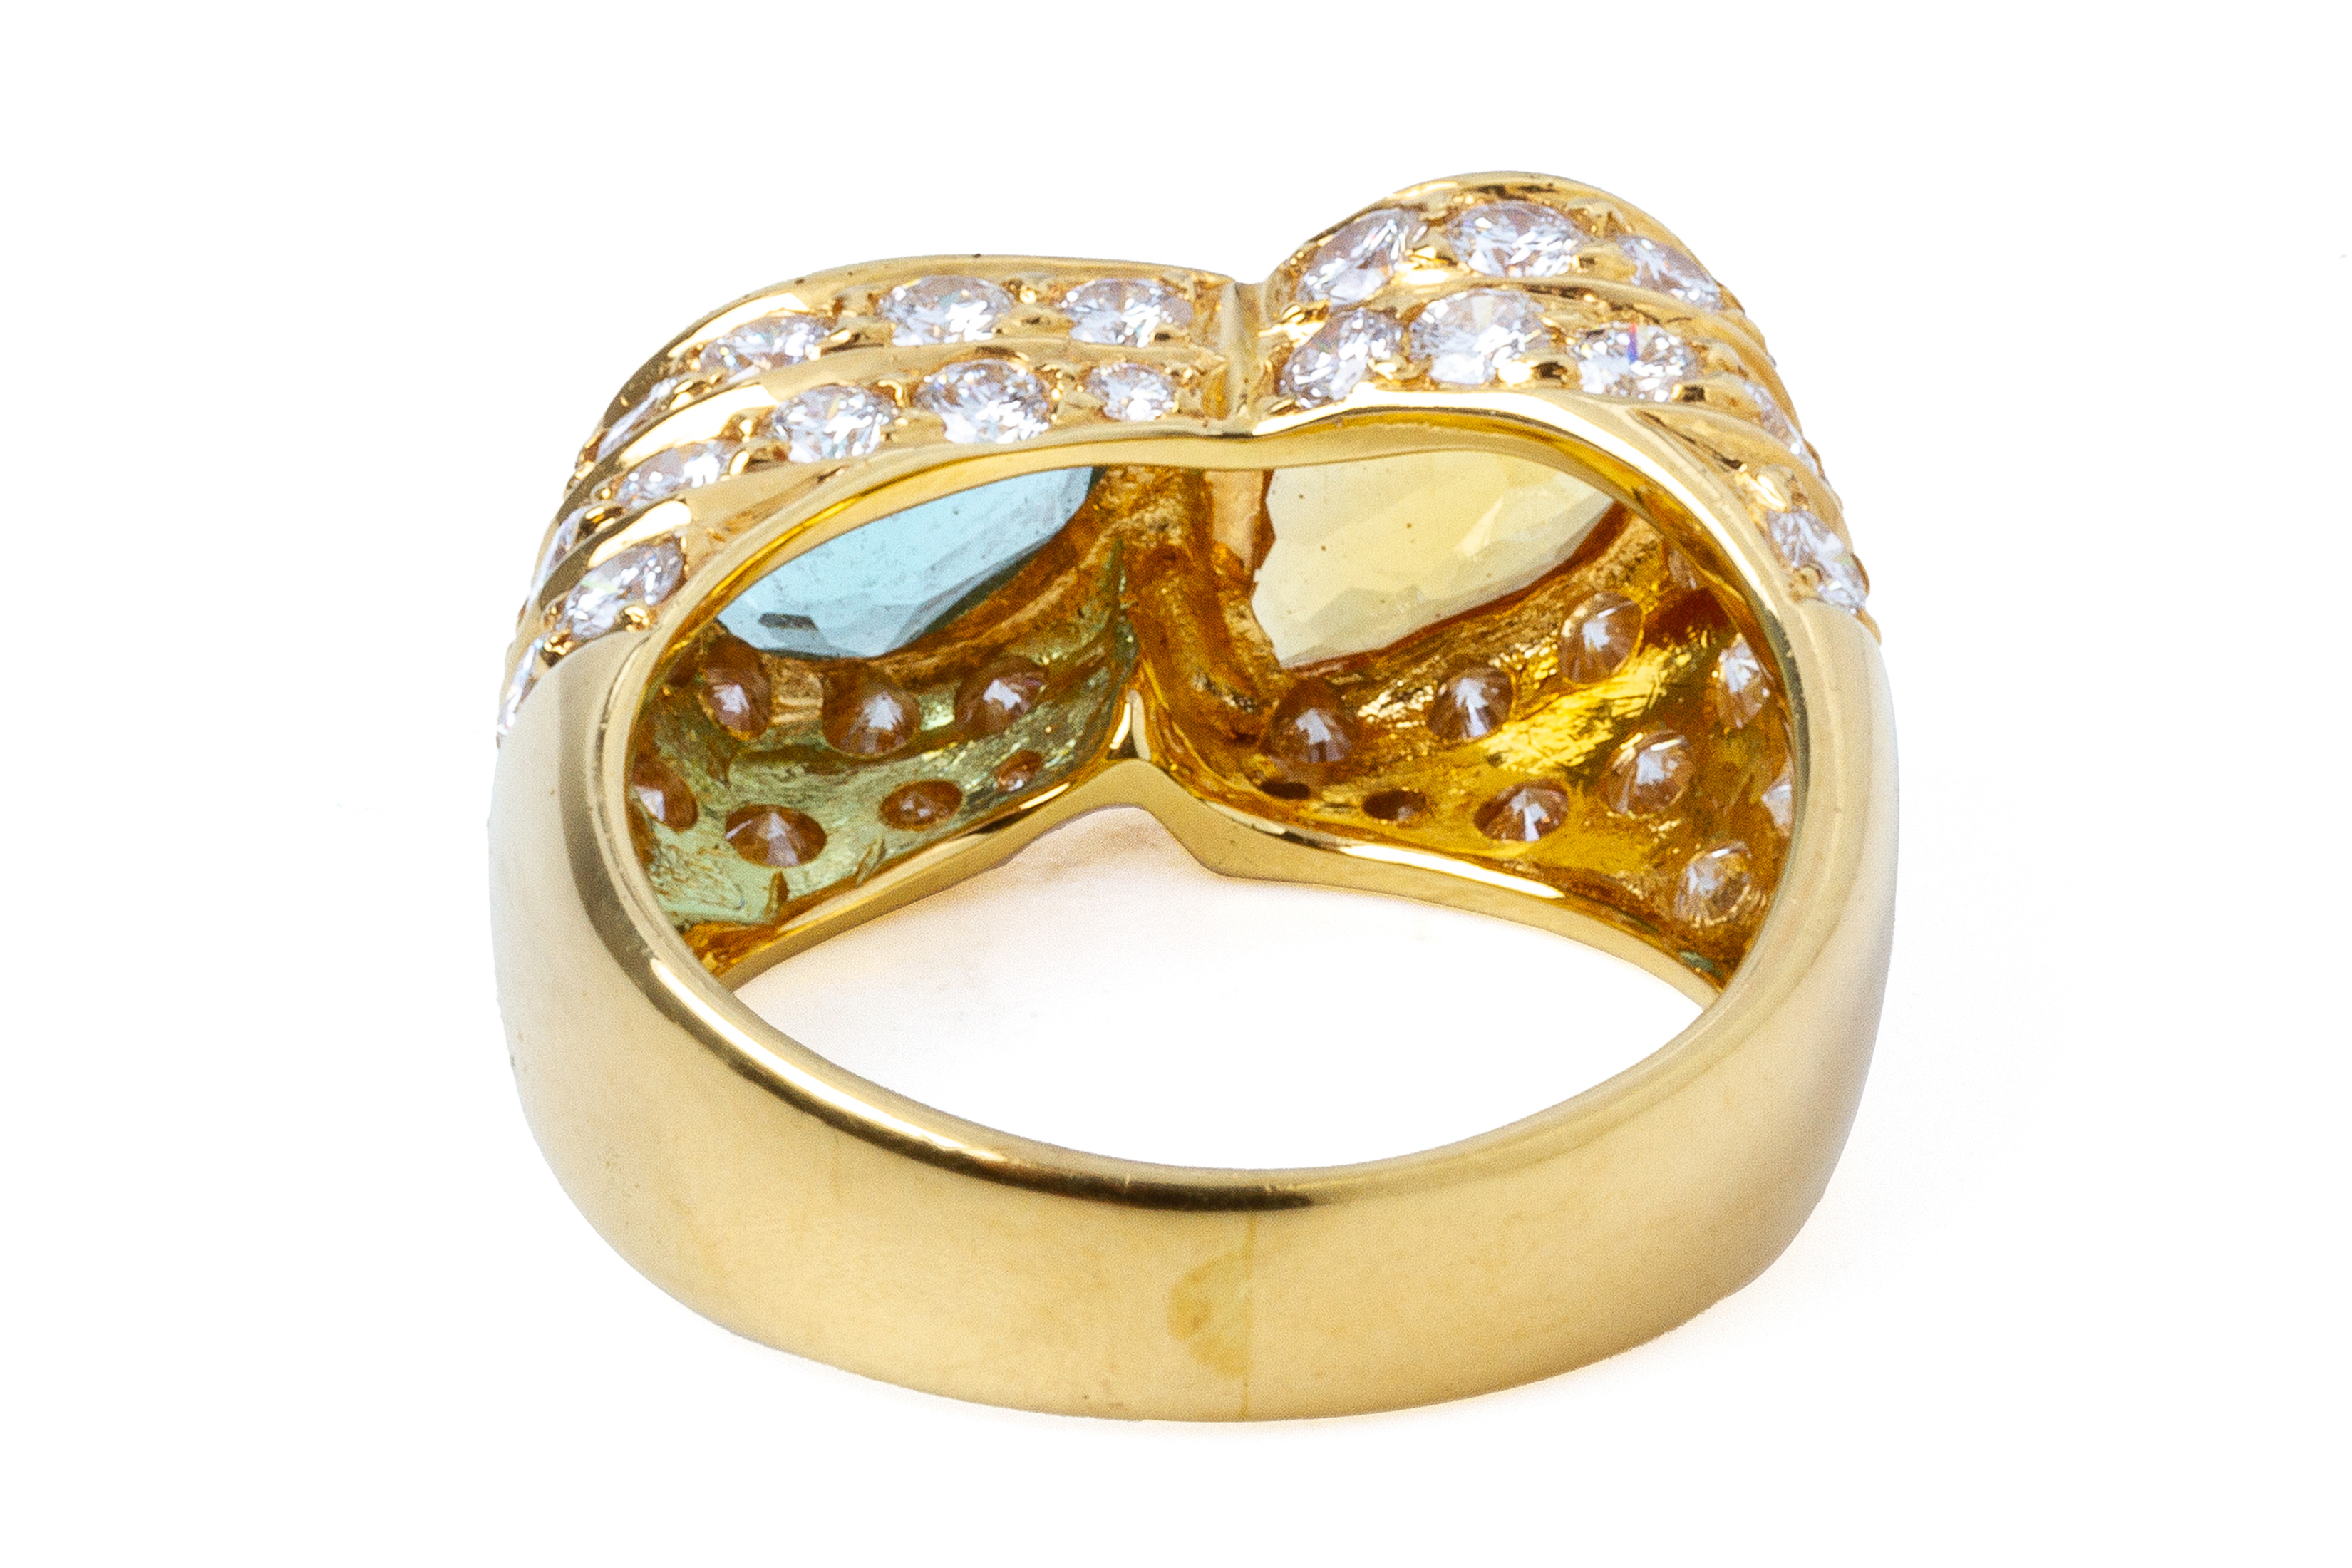 A CITRINE, DIAMOND AND BLUE STONE 'TOI ET MOI' RING - Image 3 of 4